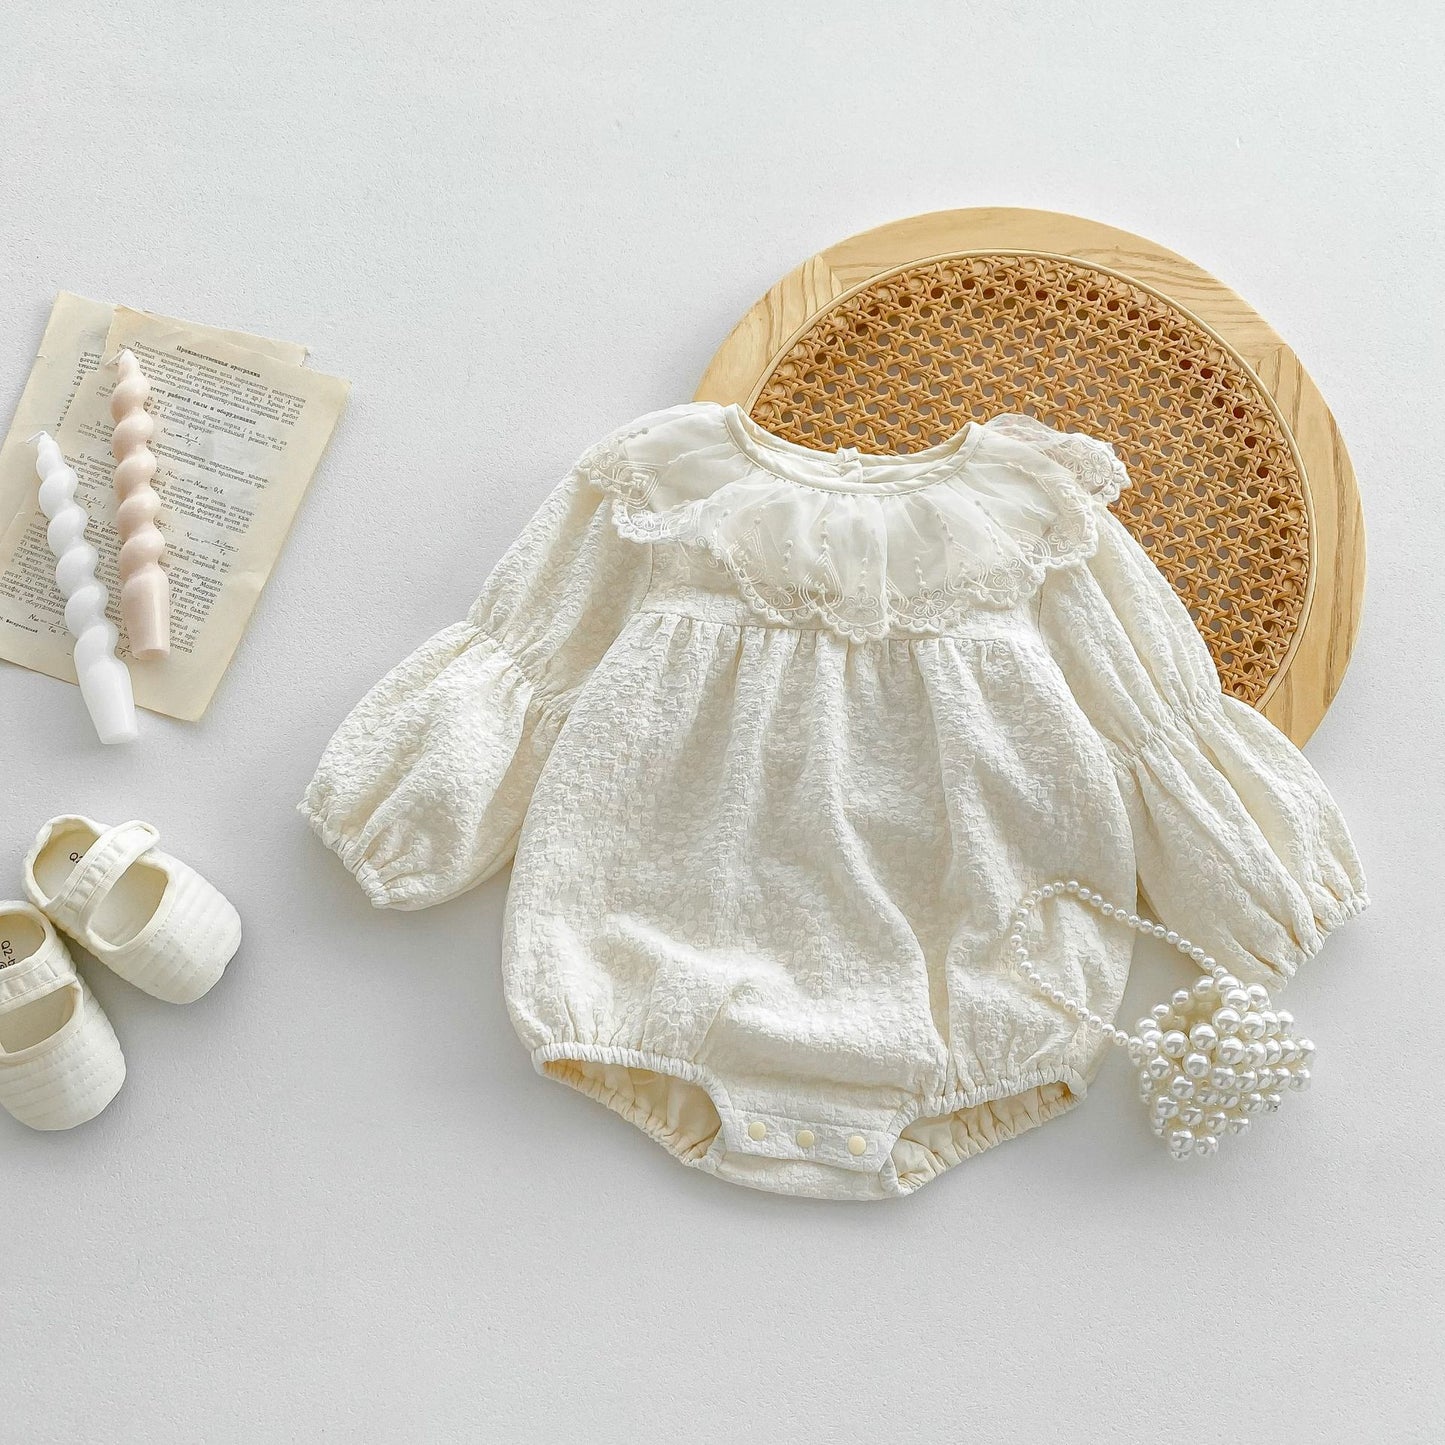 New Arrival Baby Solid Color Onesie For Girls With Lace Collar